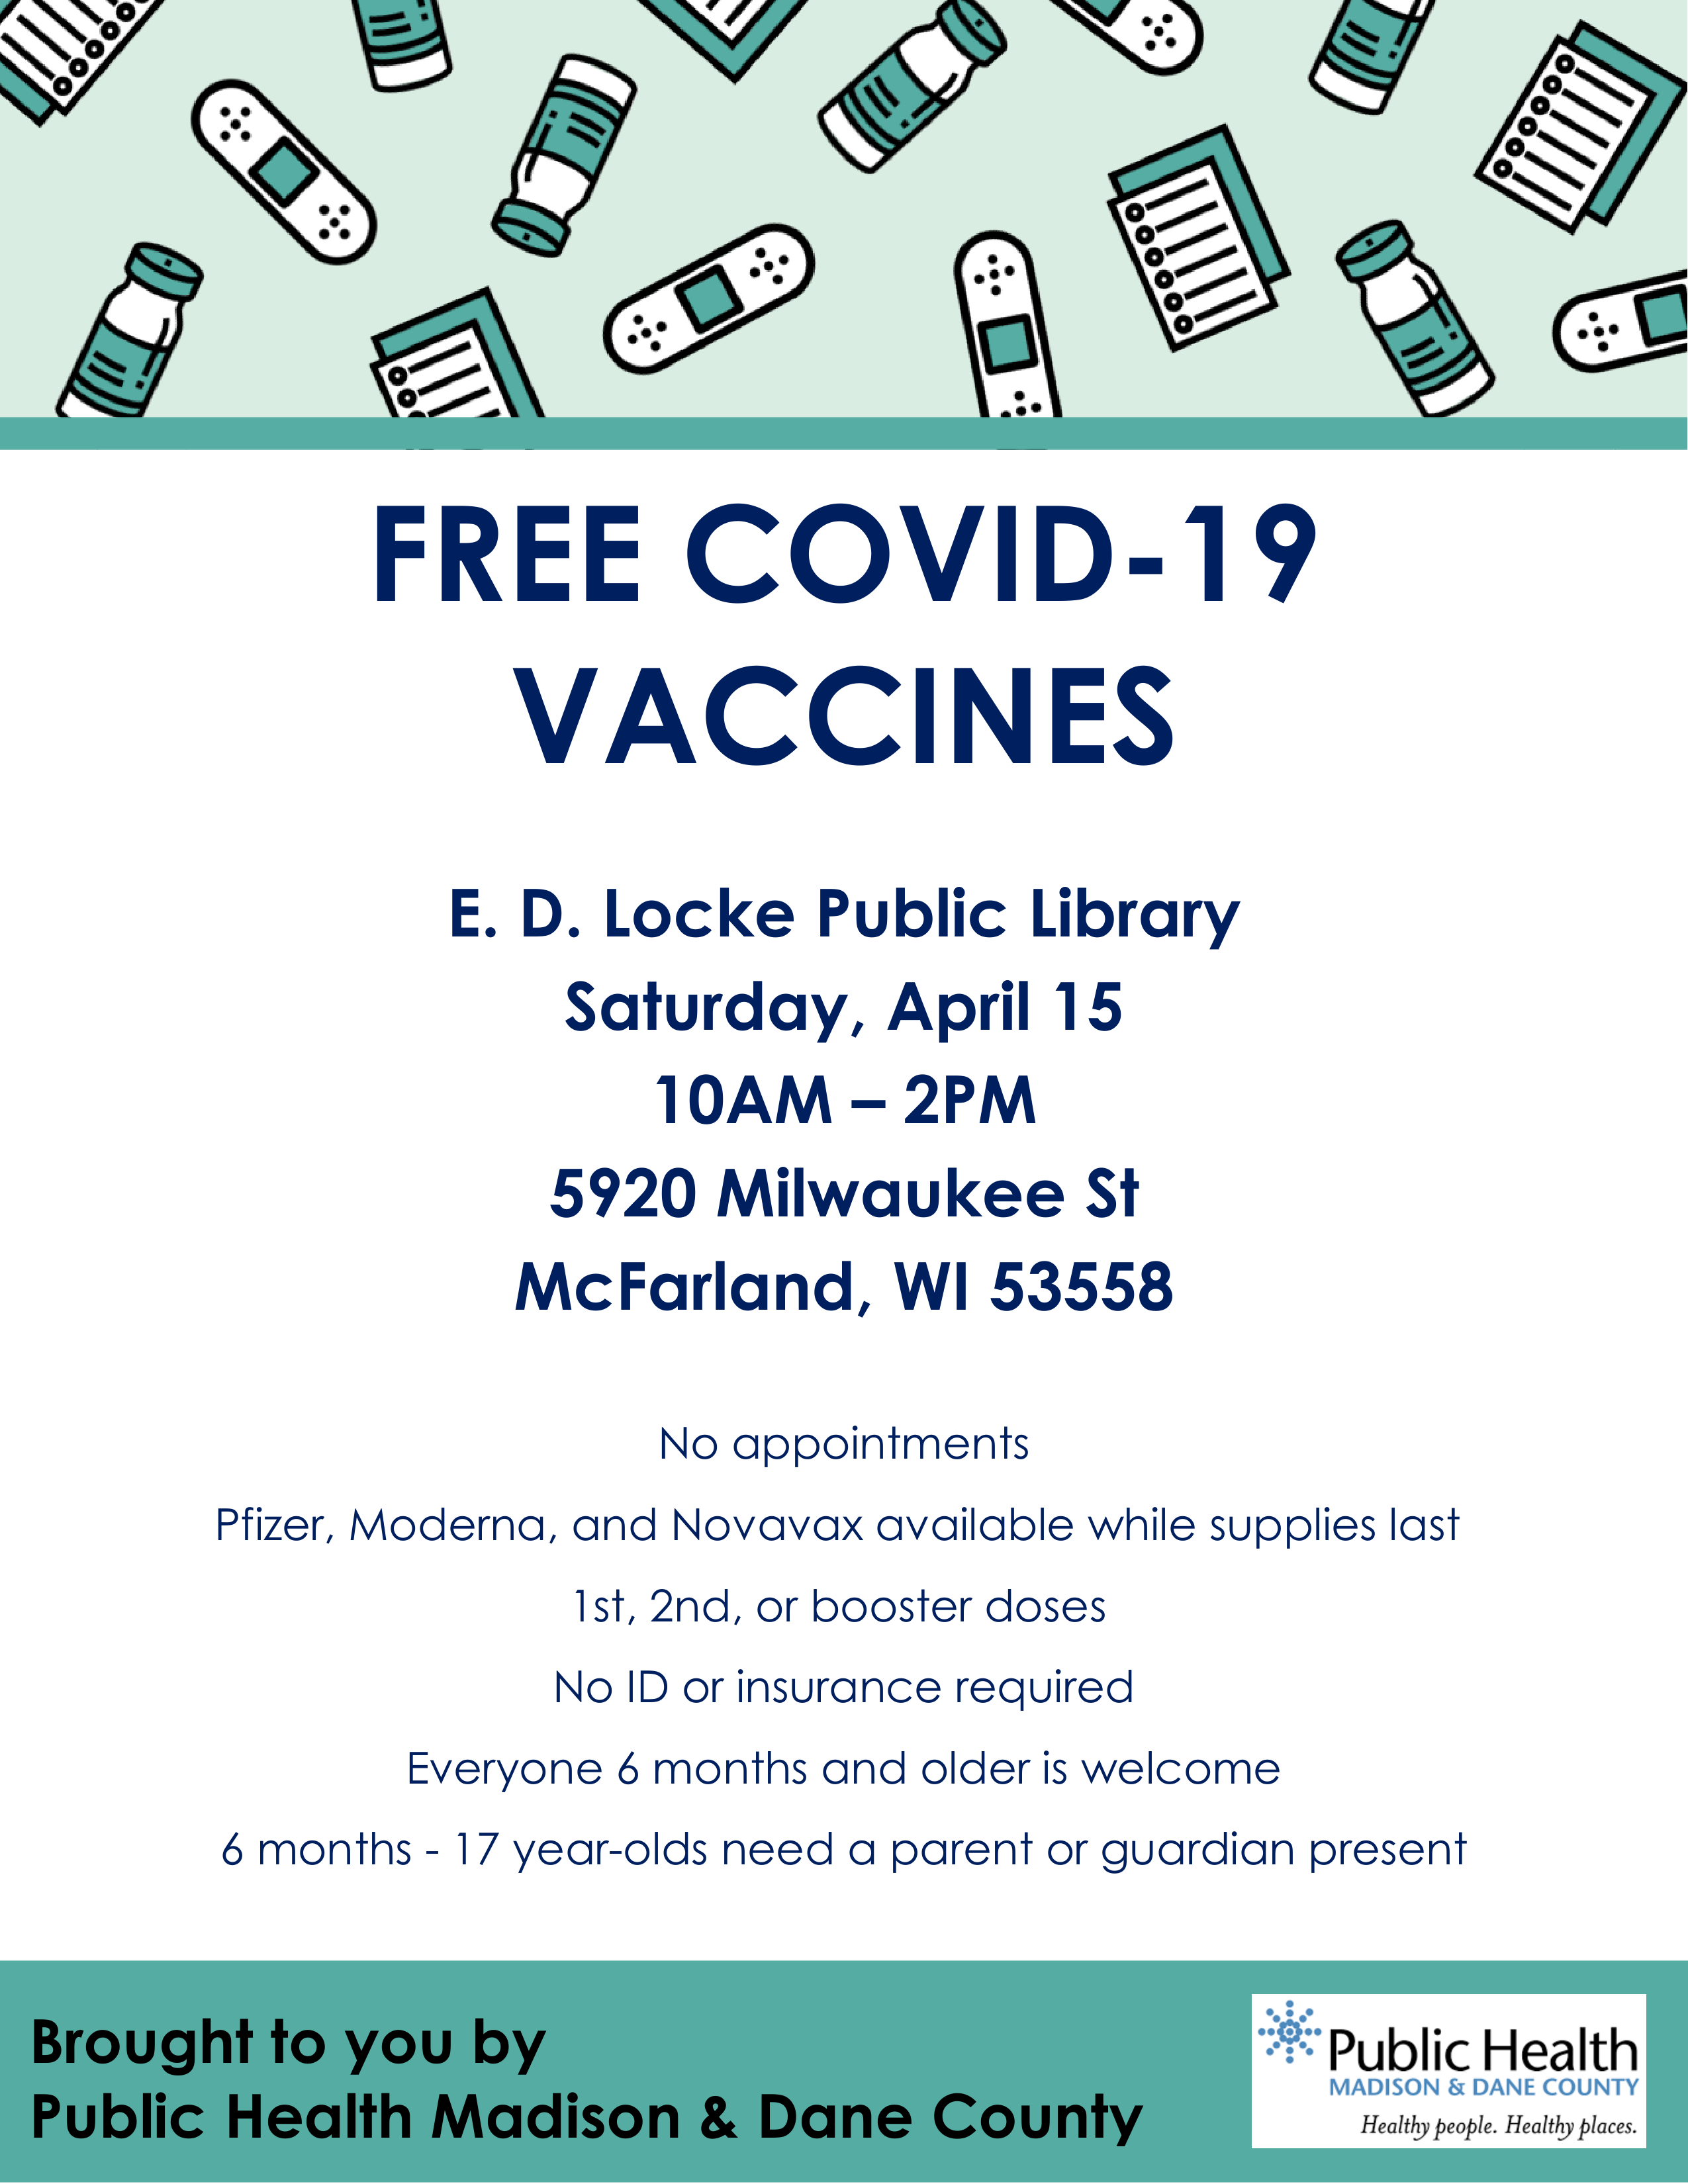 Free COVID-19 Vaccines at ED Locke Public Library on Saturday, April 15 from 10 AM to 2 PM